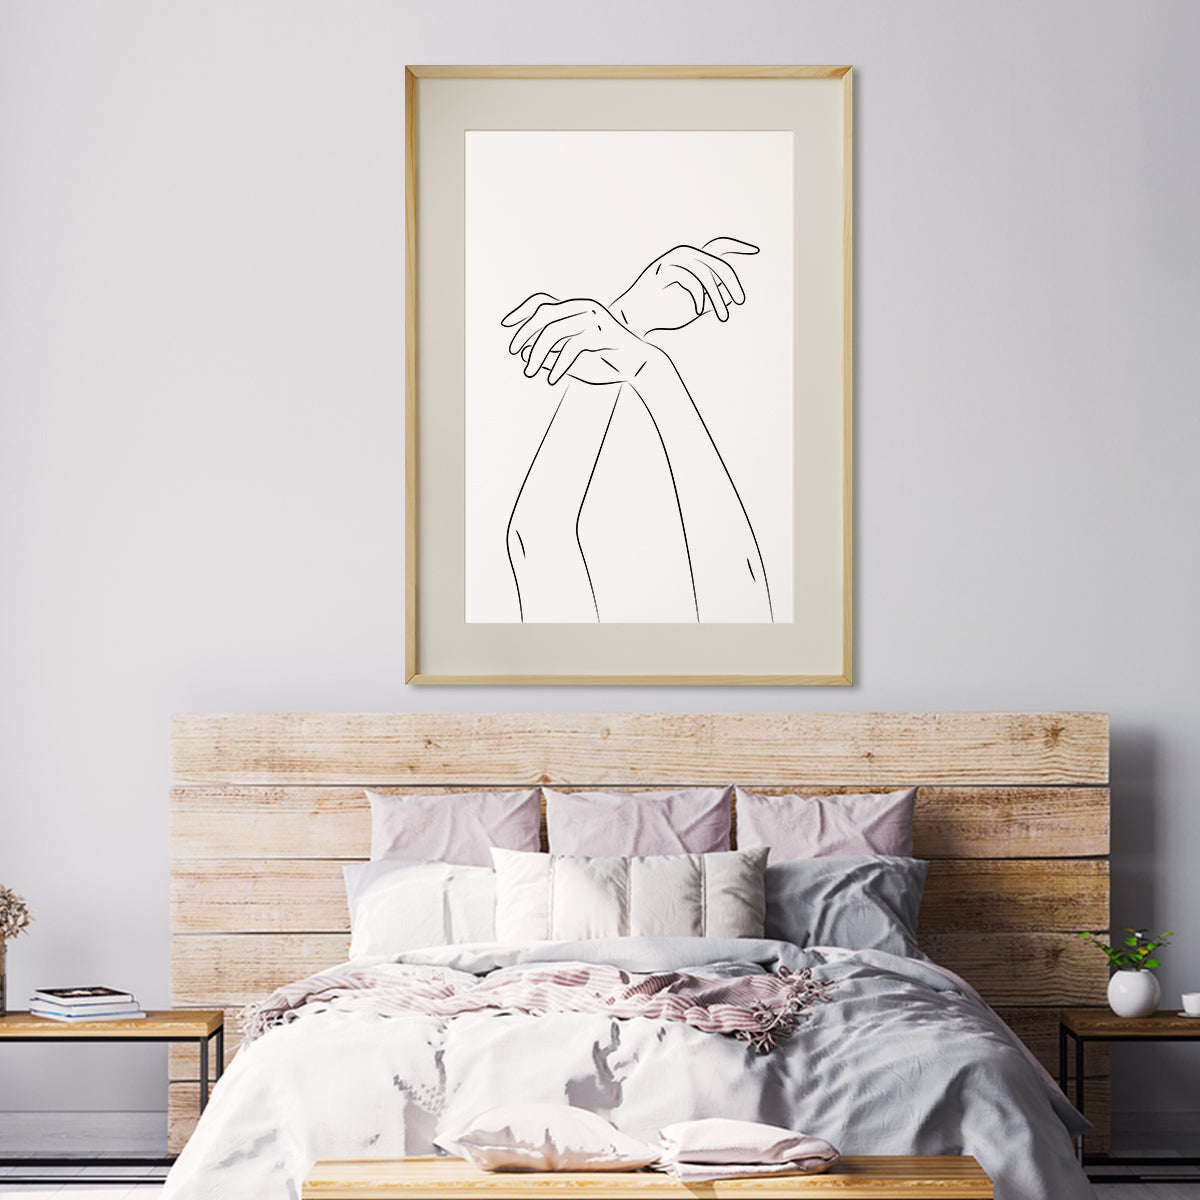 Trendy Minimalist Hands Line Art Posters Art Decor for Home-Vertical Posters NOT FRAMED-CetArt-8″x10″ inches-CetArt